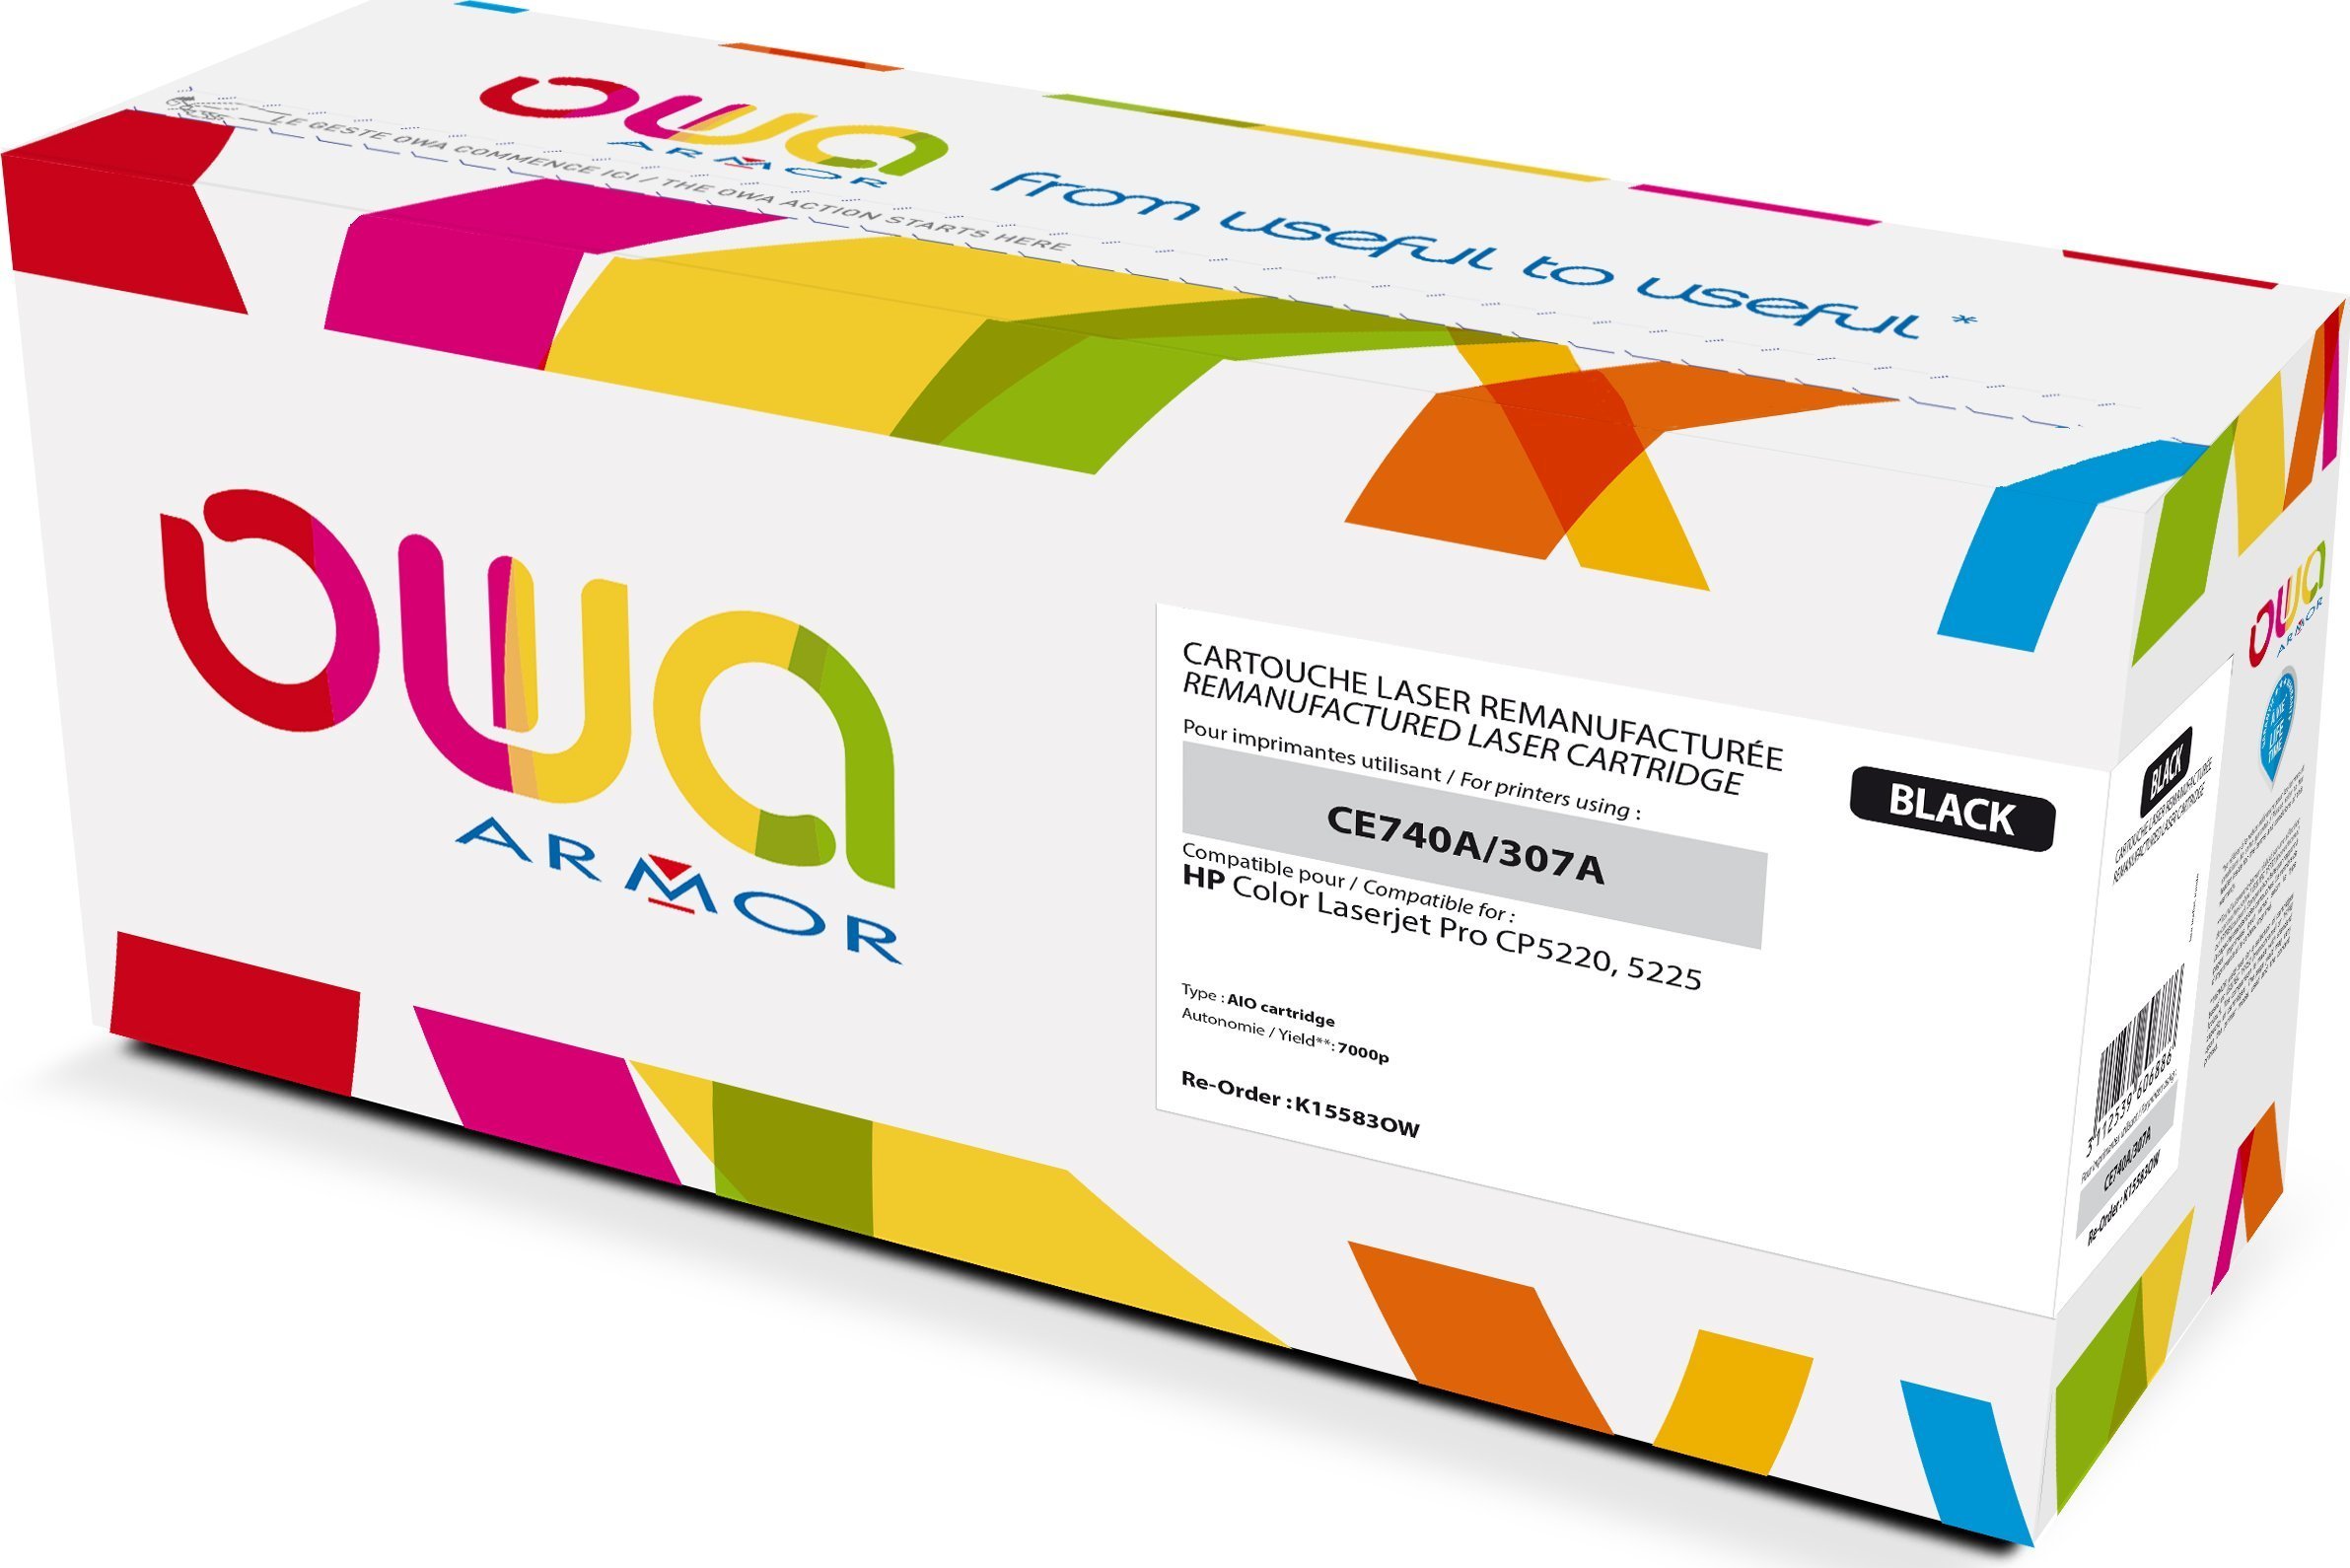 Toner OWA Armor Armor OWA - black - Toner cartridge (Alternative for: HP CE740A) - for HP Color LaserJet Professional CP5225, CP5225dn, CP5225n (K15583OW)